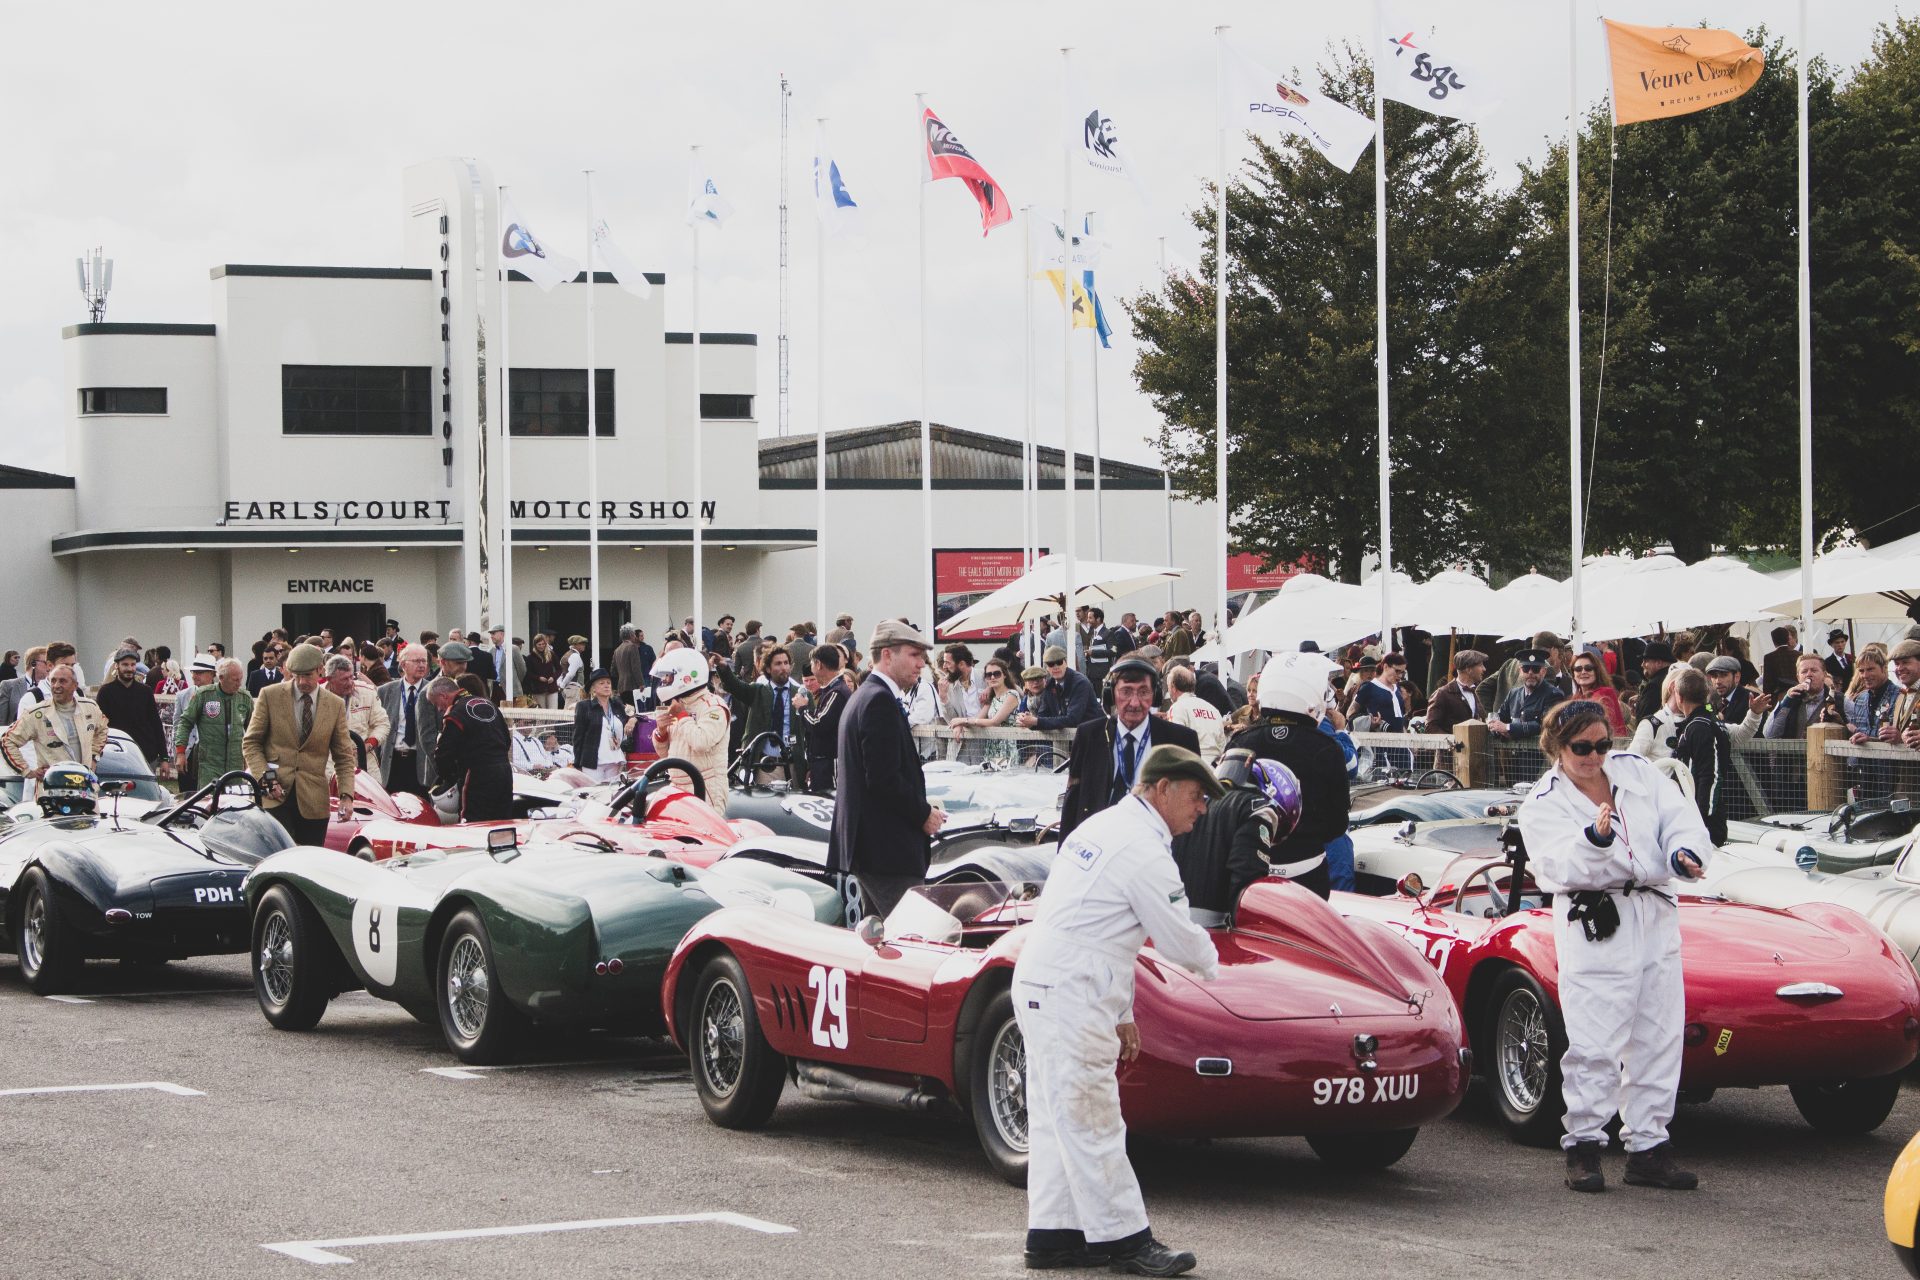 A photo of the Goodwood Revival Sussex Trophy Race Grid with 3 classic race cars in view. The event was attended by our classic car finance team.